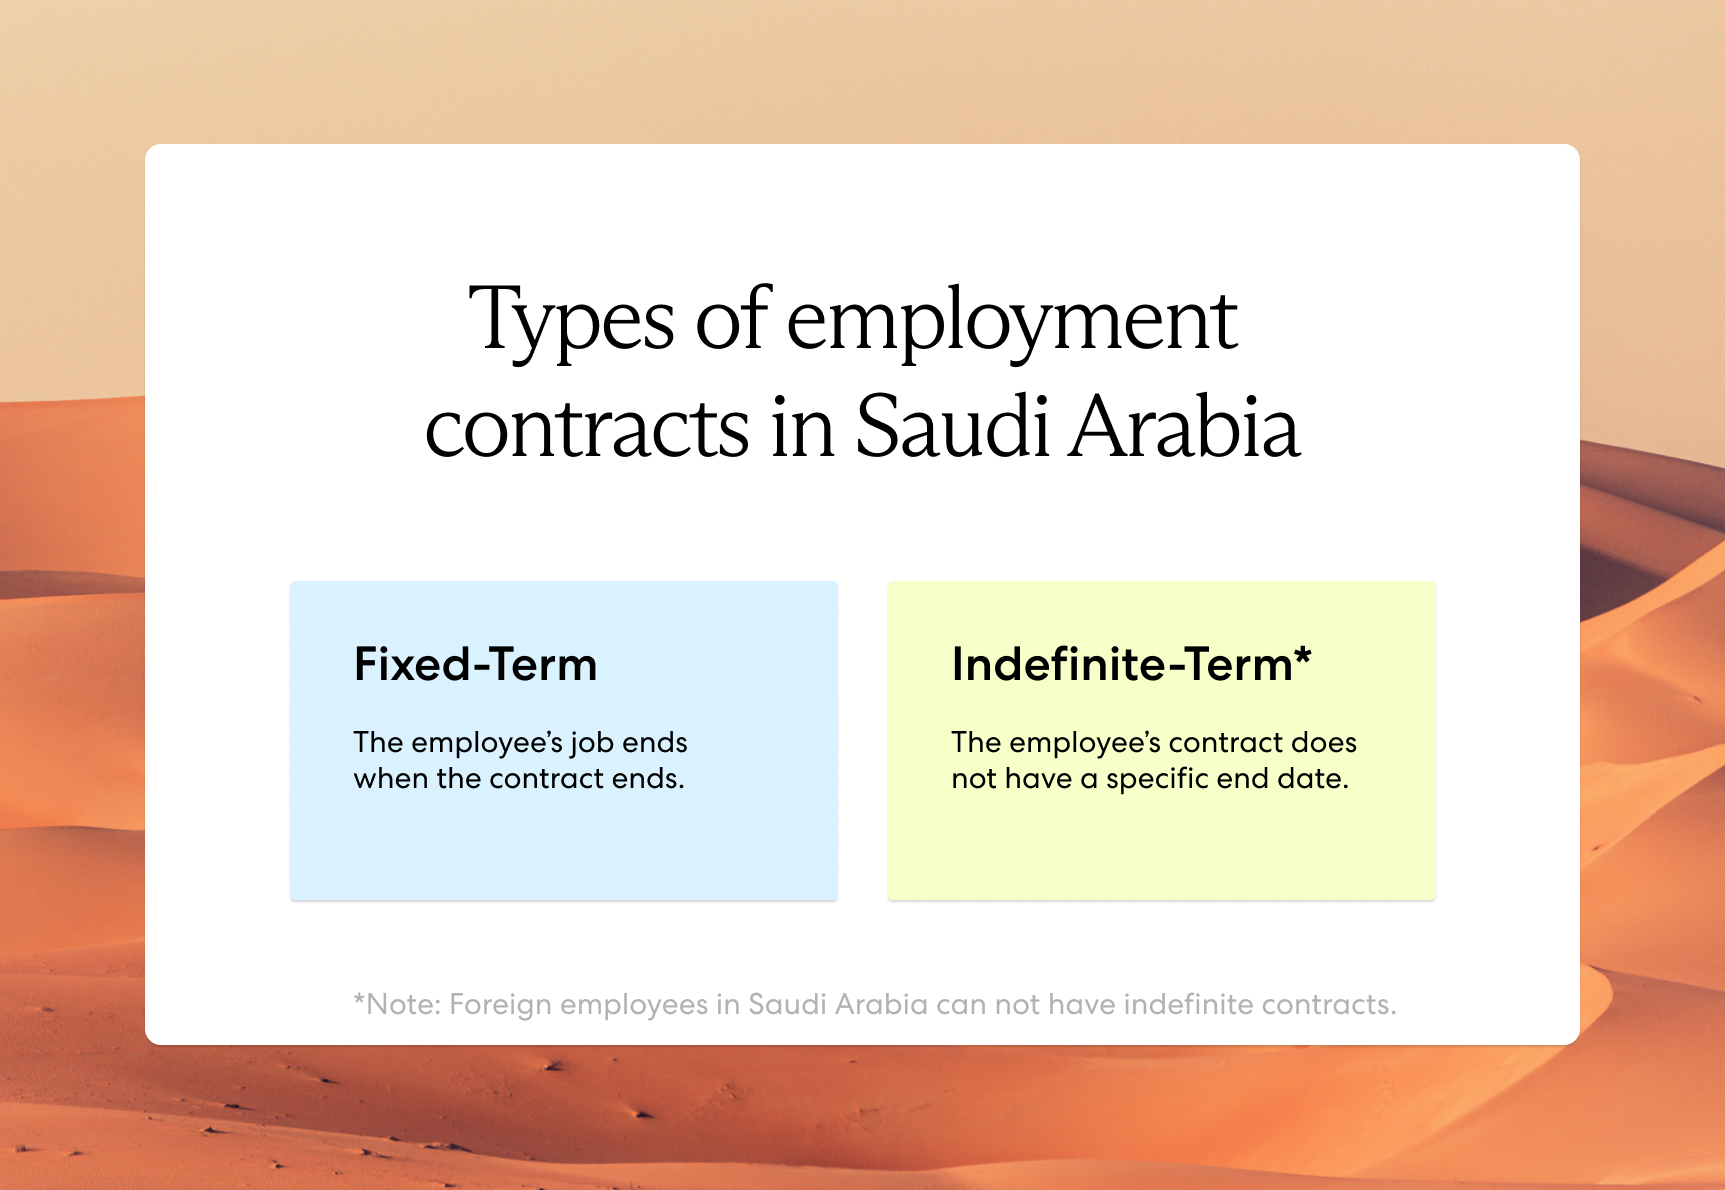 Employment contracts in Saudi Arabia are indefinite or fixed-term, but only Saudi nationals can have indefinite-term contracts